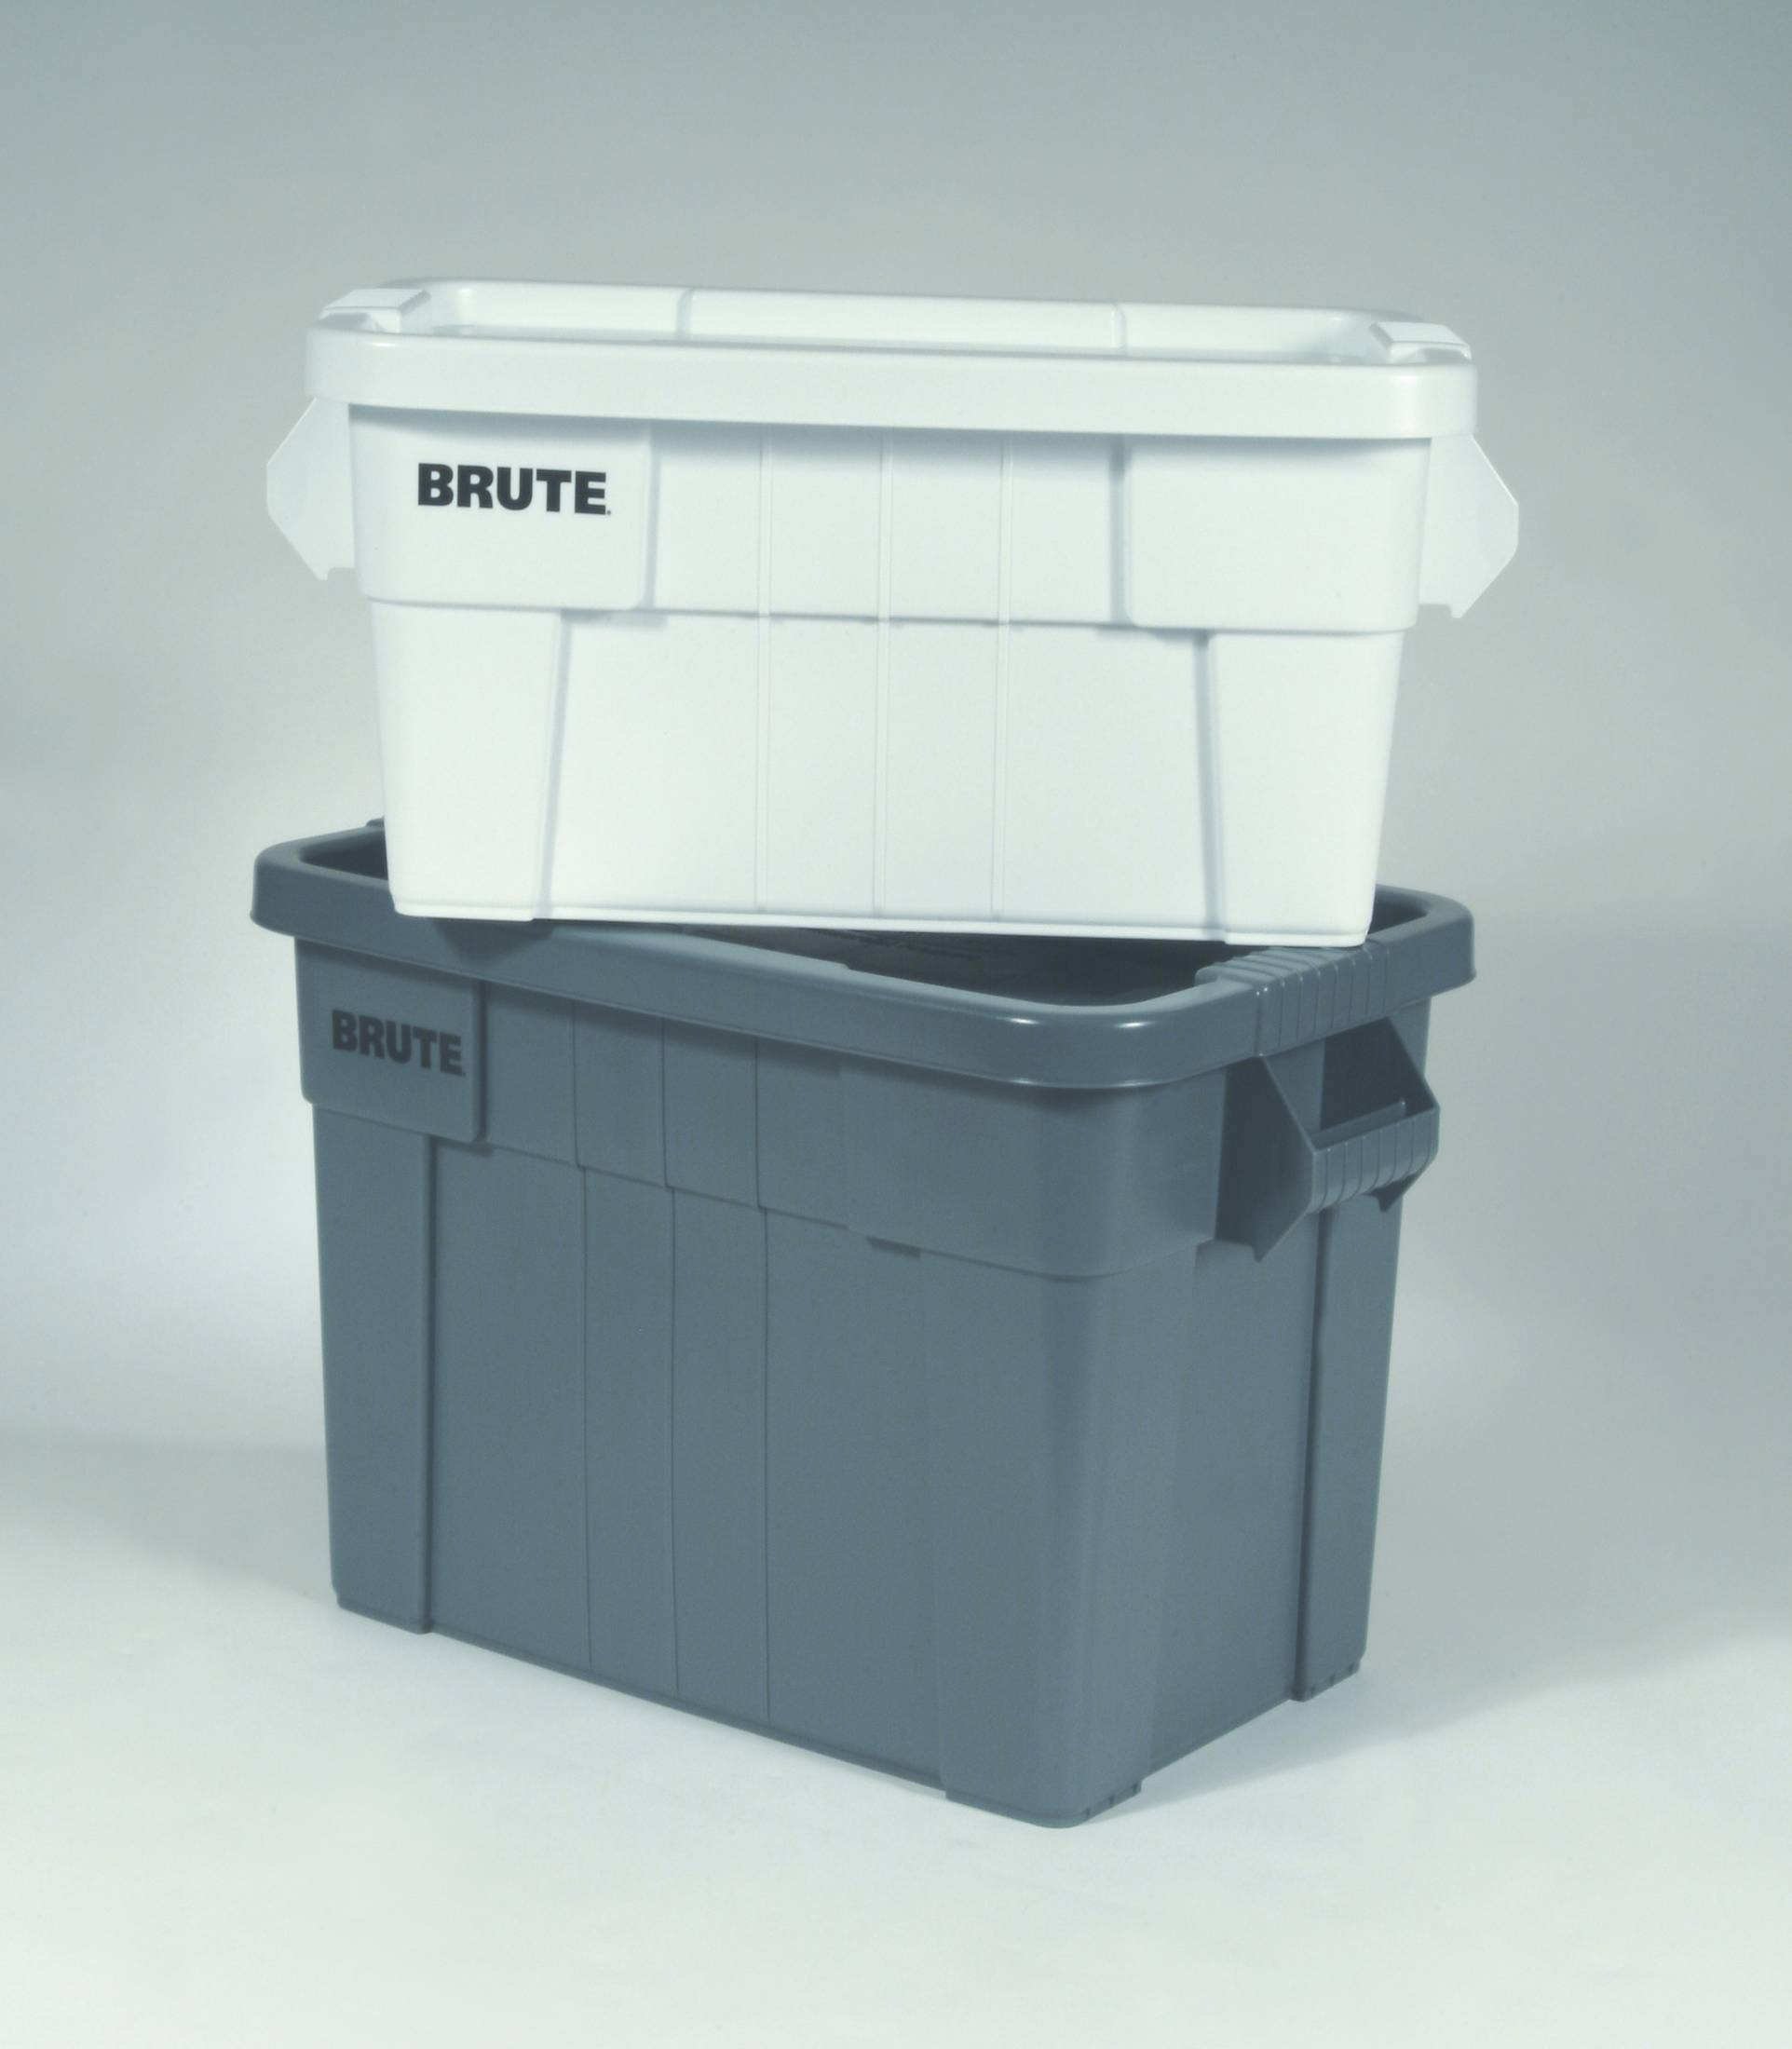 https://www.rubbermaidcommercialproducts.com/wp-images/product/detail/9S31-Brutes.jpg